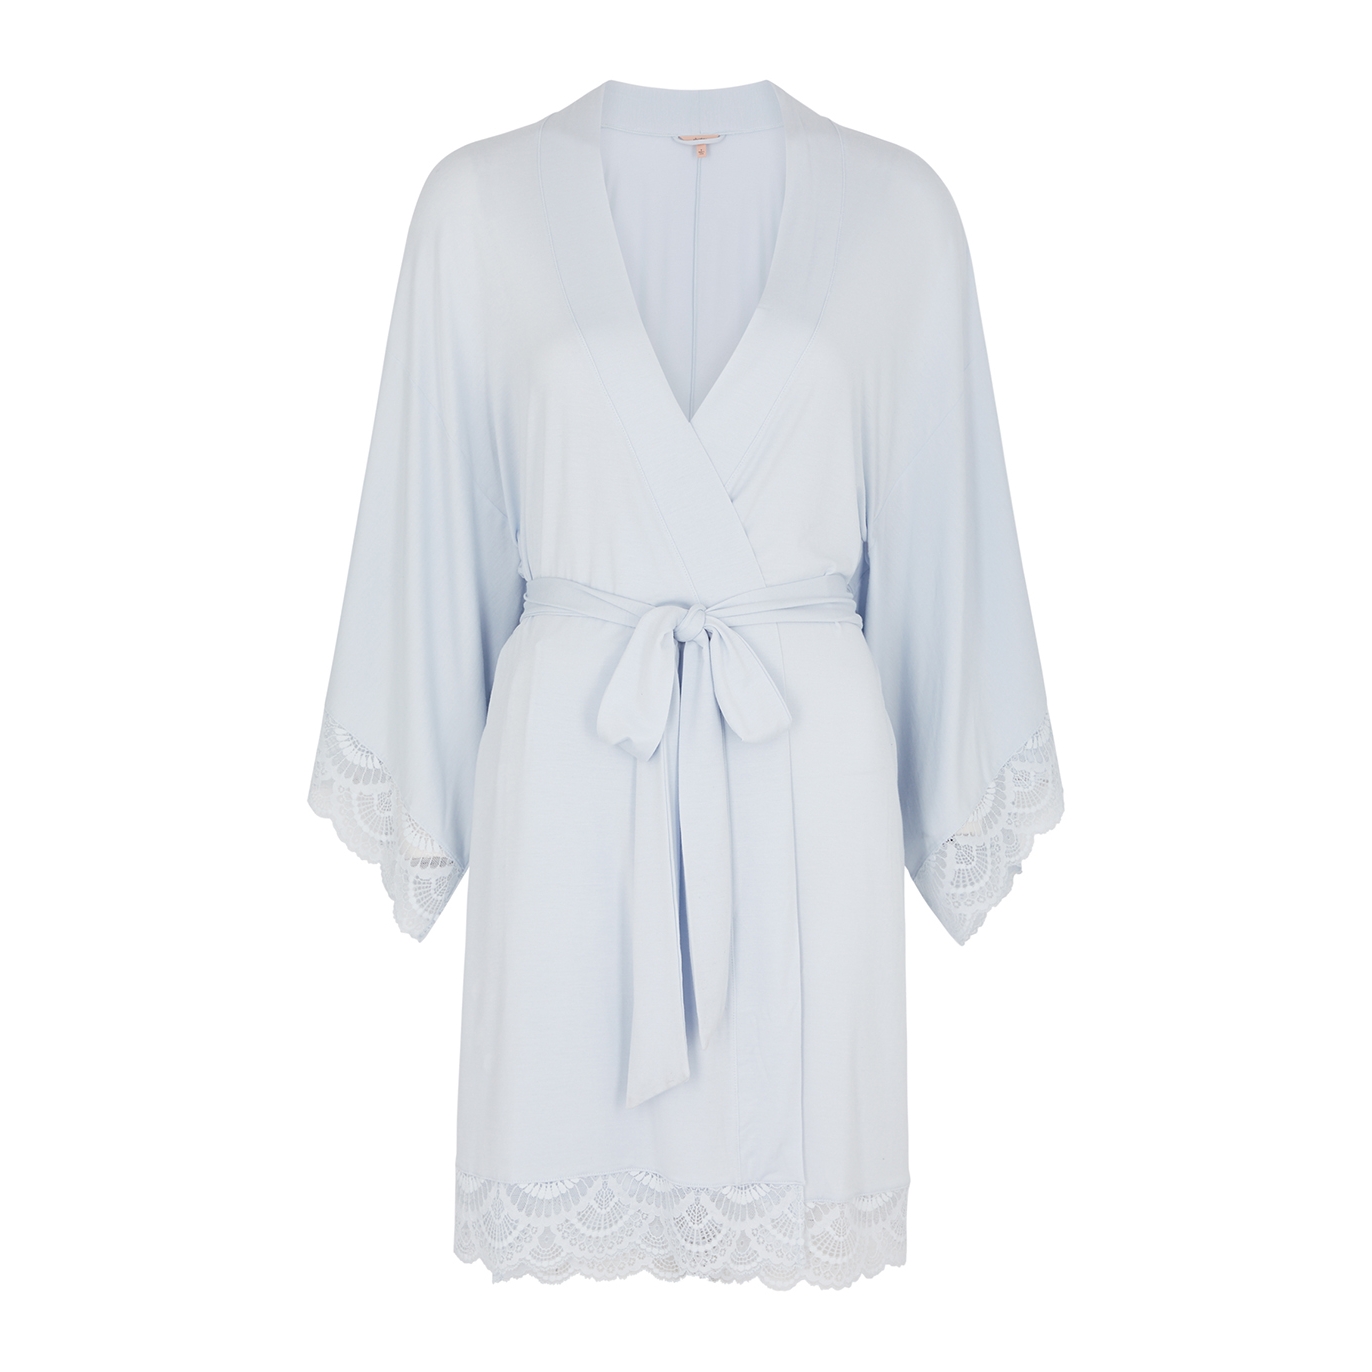 EBERJEY MARIANA LACE-TRIMMED STRETCH-JERSEY ROBE